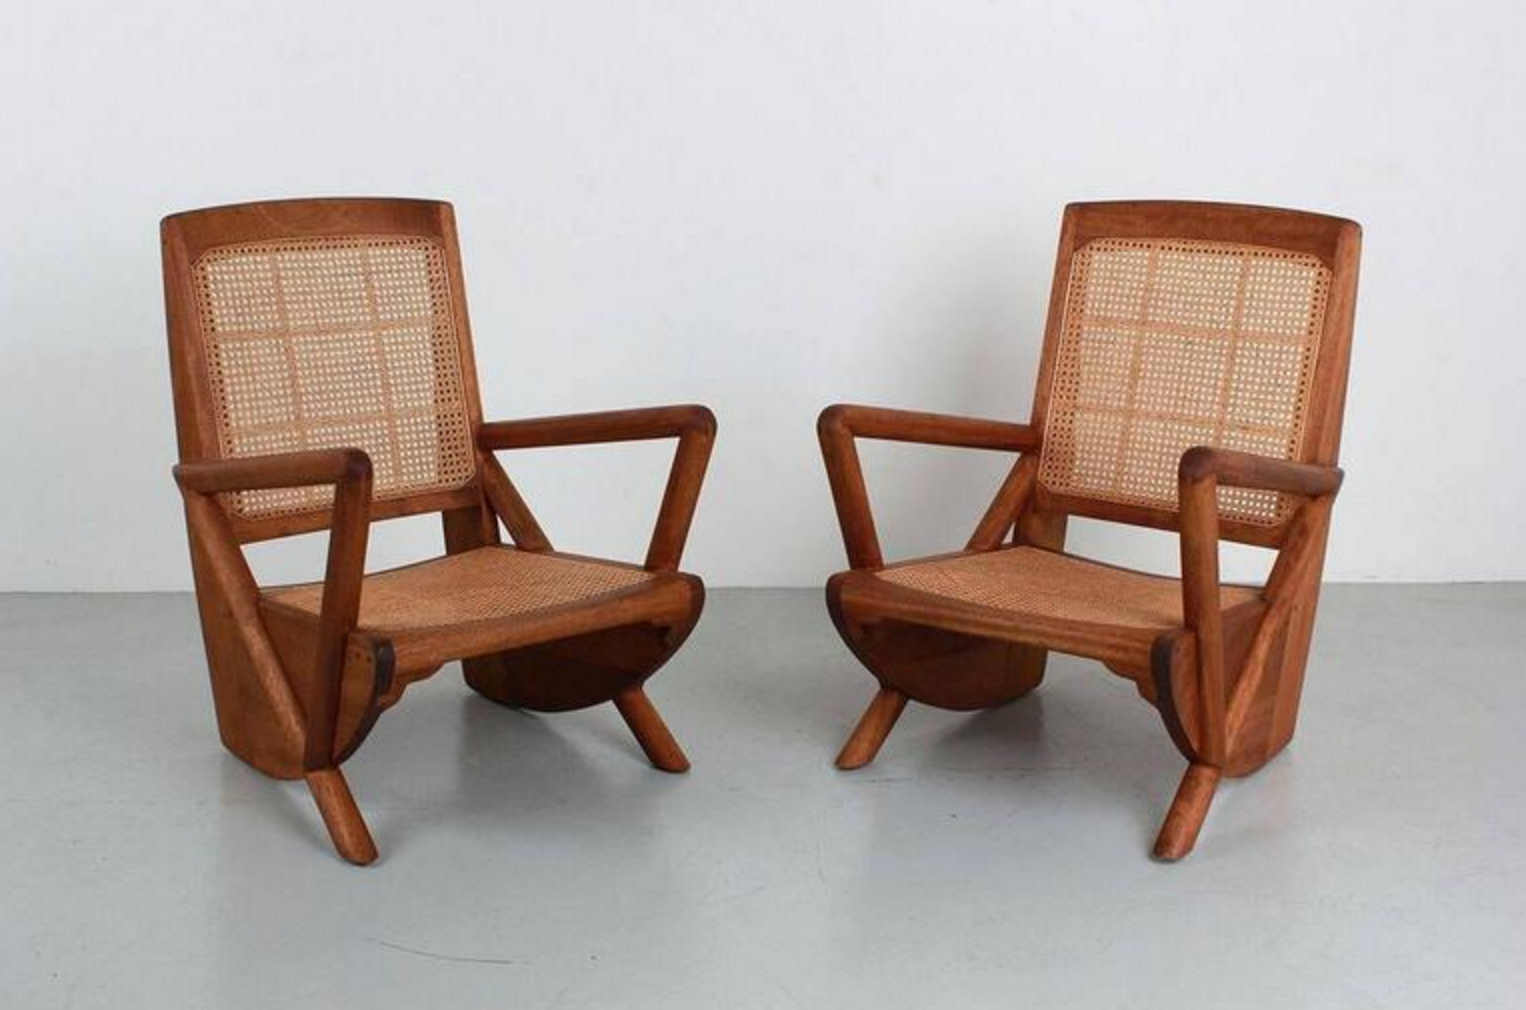 Mulholland Caned Chairs Orange Furniture Los Angeles